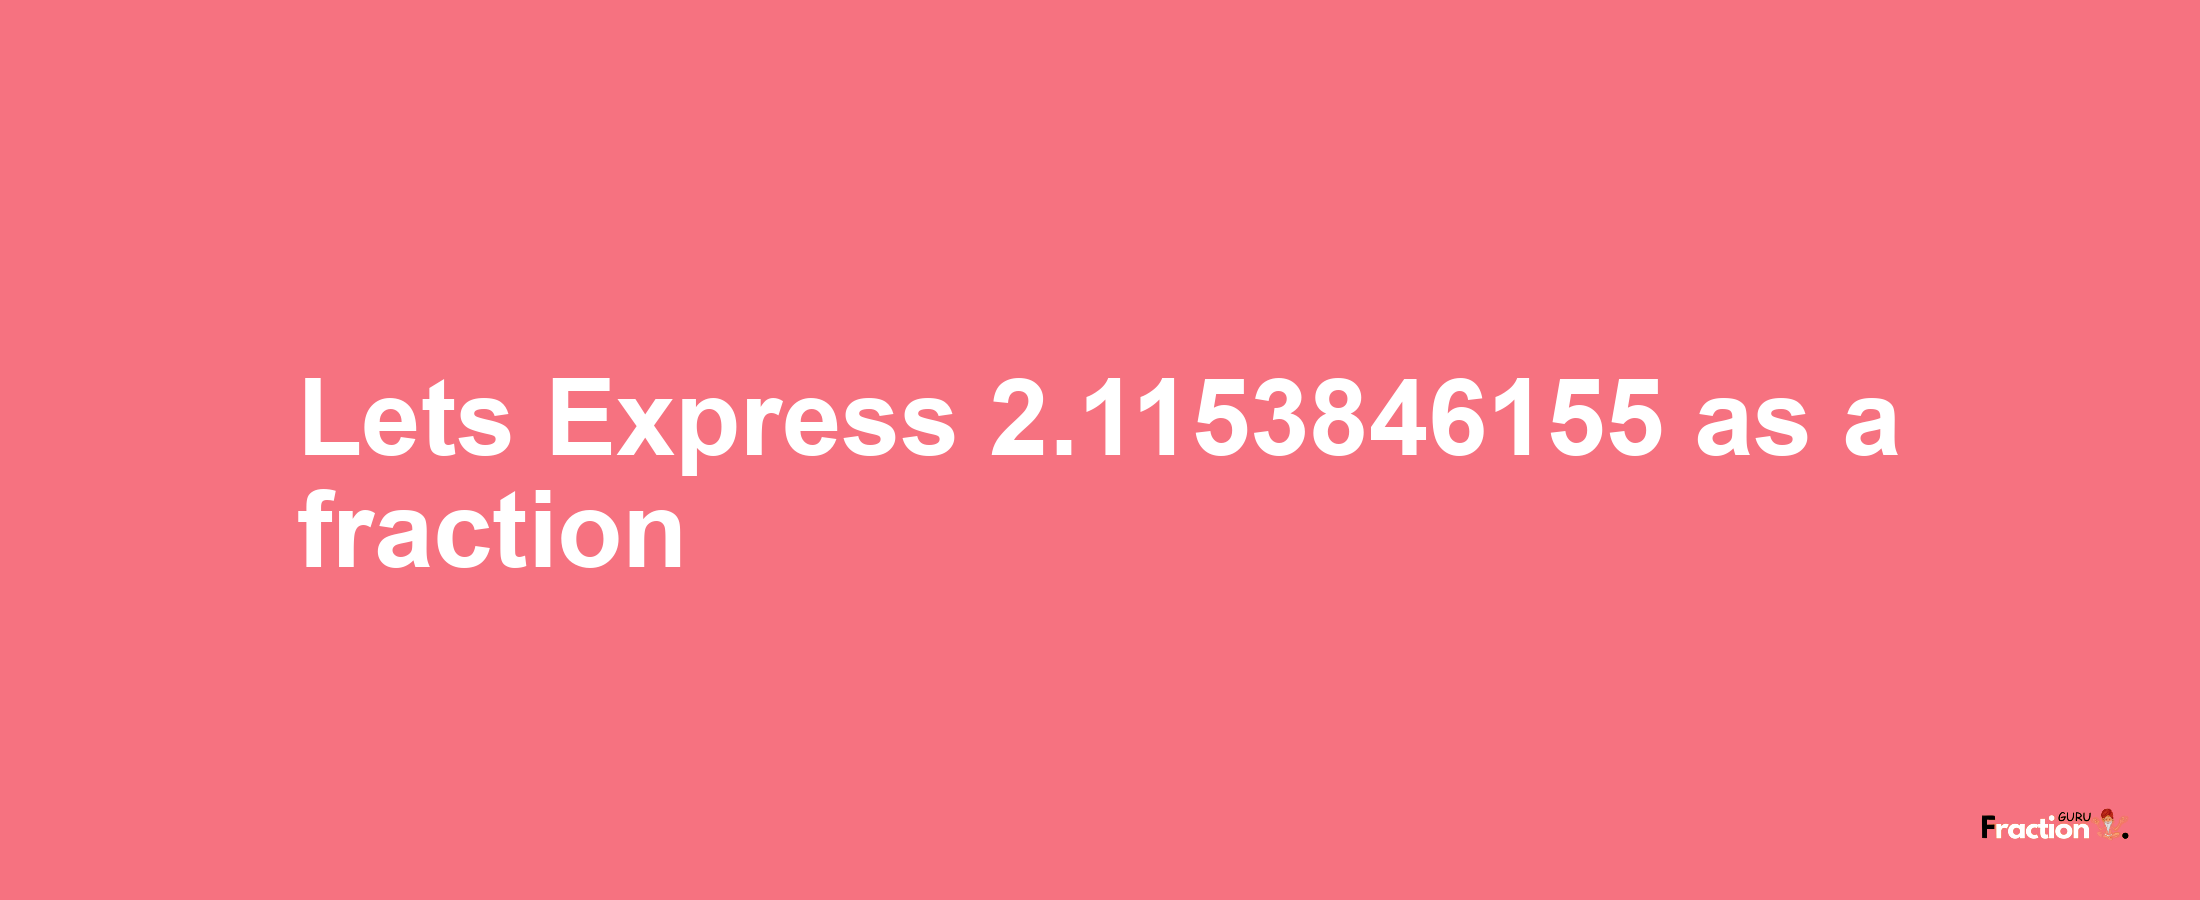 Lets Express 2.1153846155 as afraction